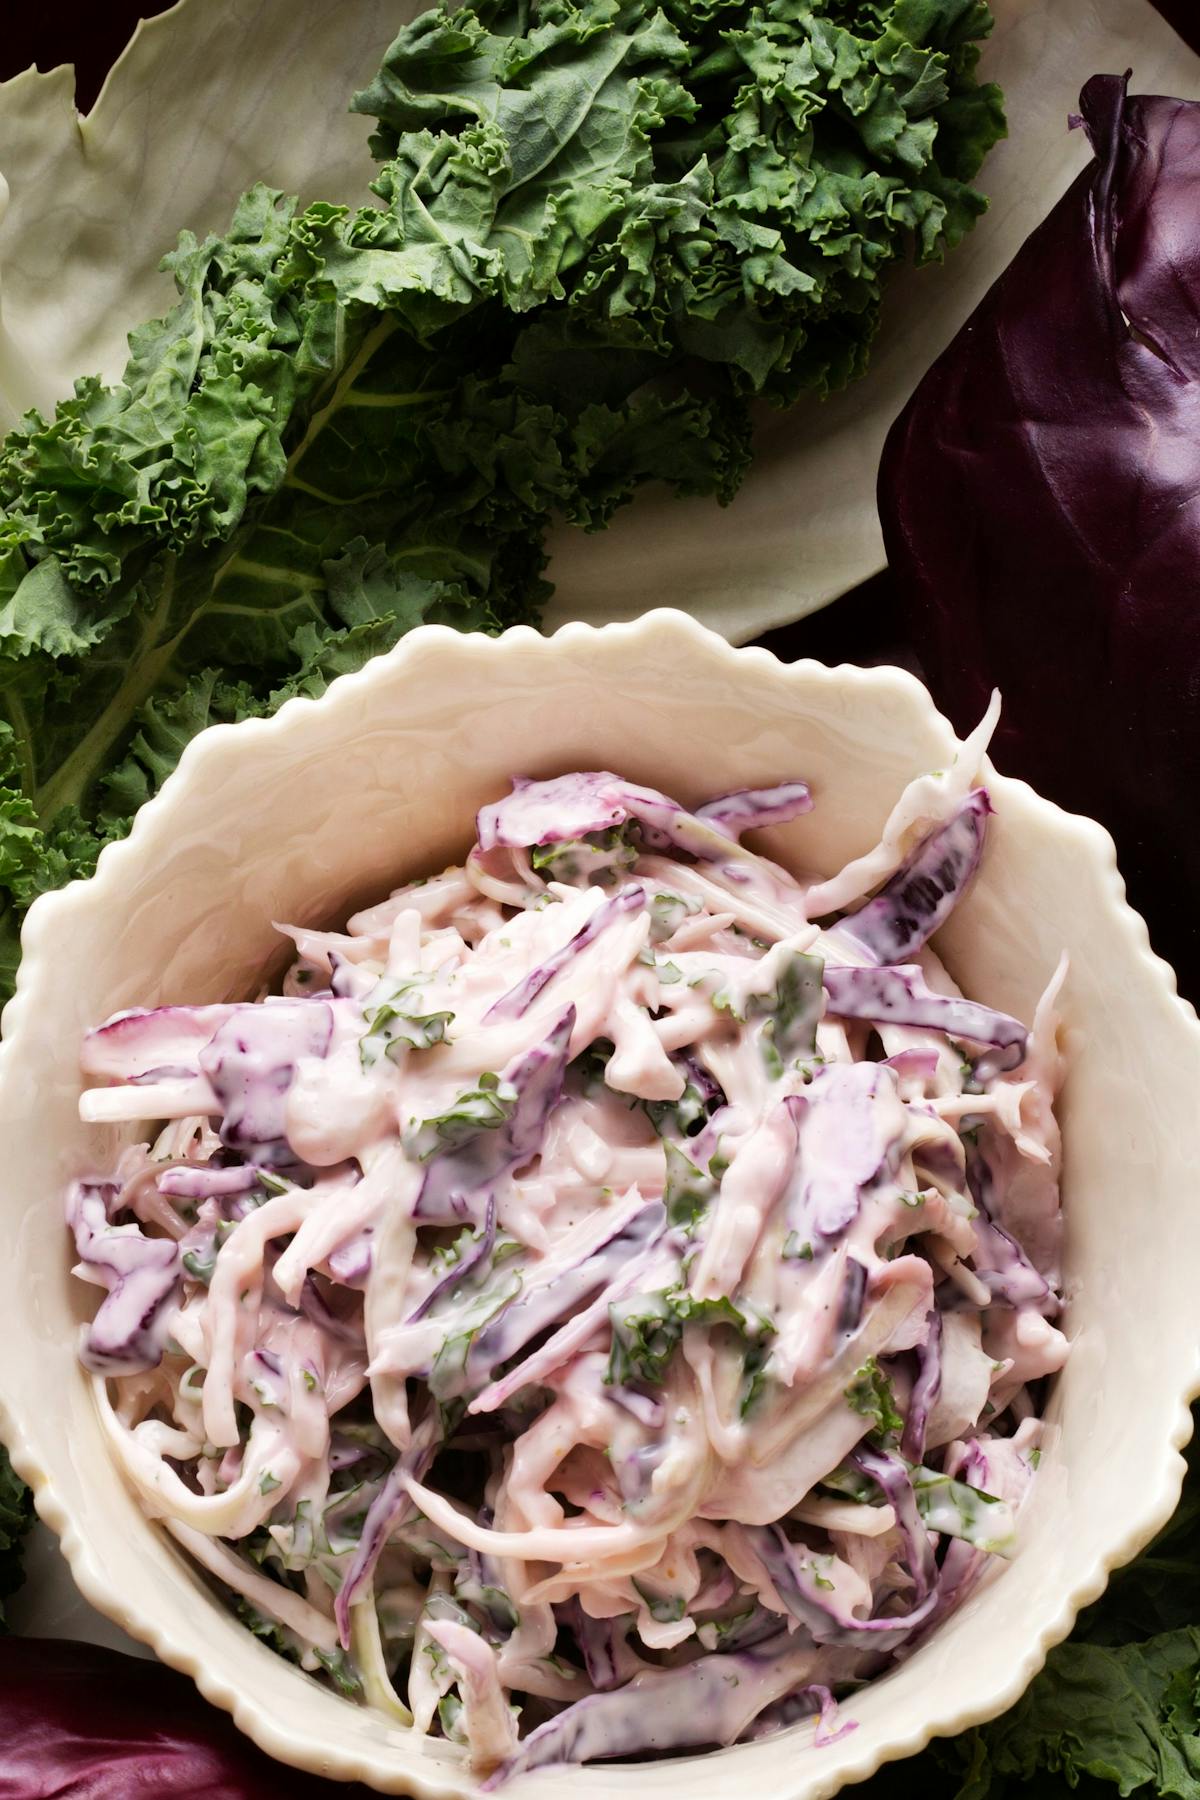 Mixed cabbage coleslaw